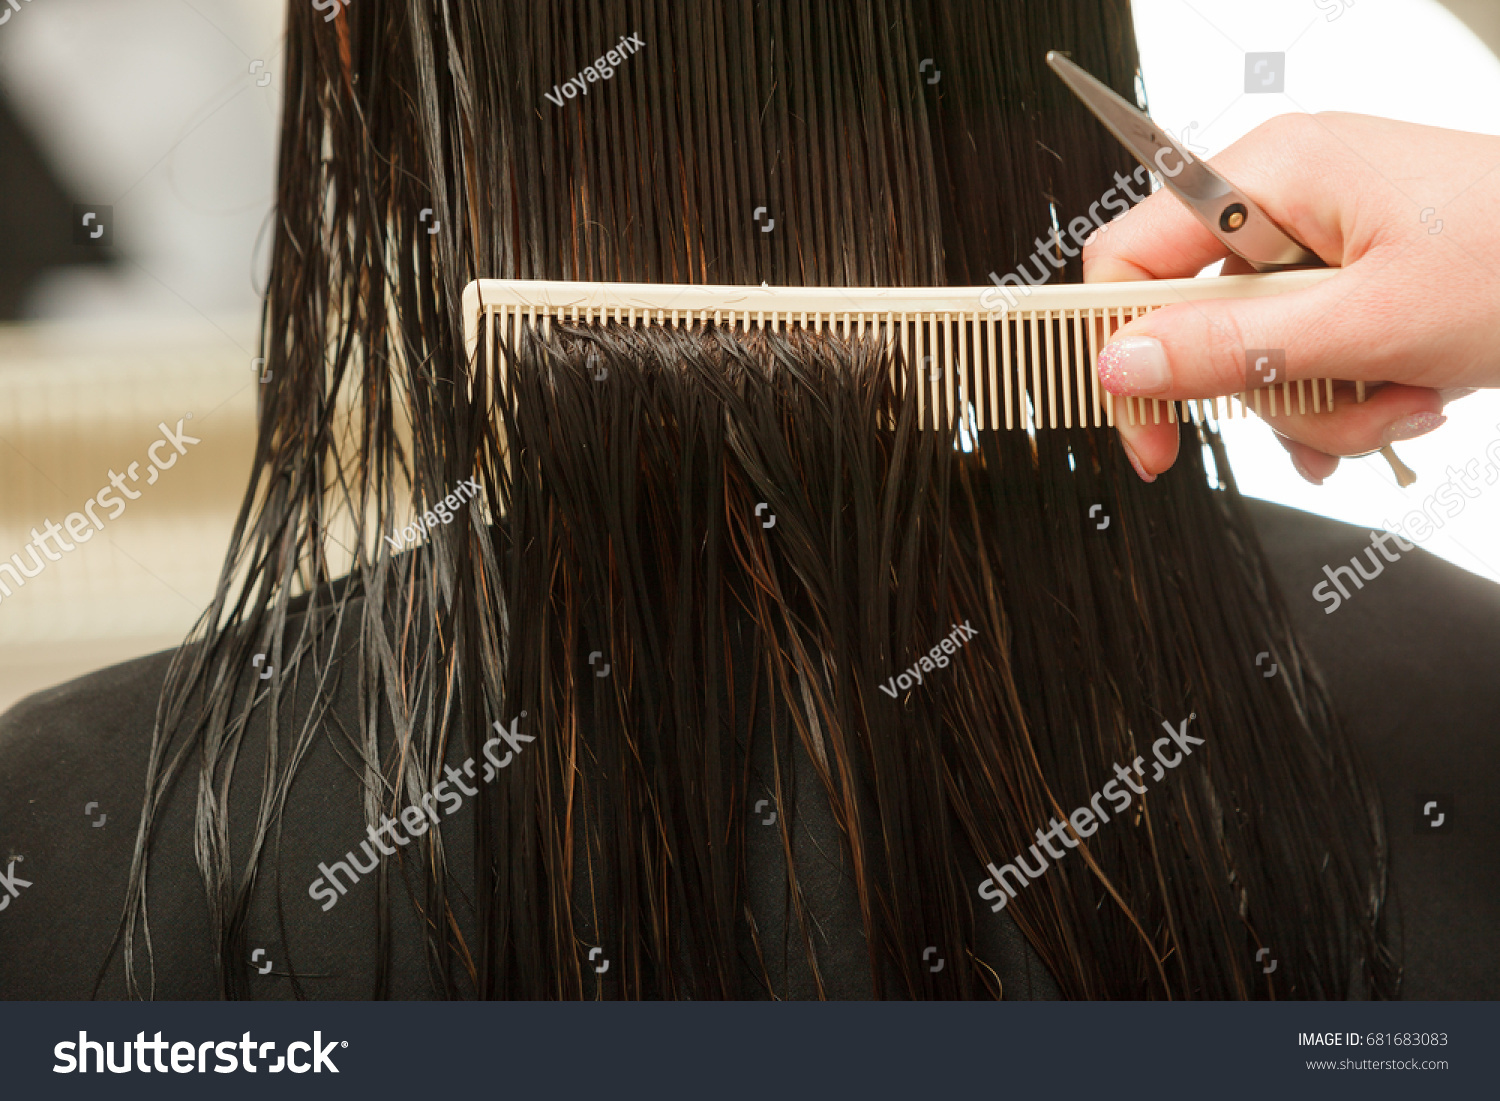 Professional Hair Styling Trimming Split Ends Stock Photo